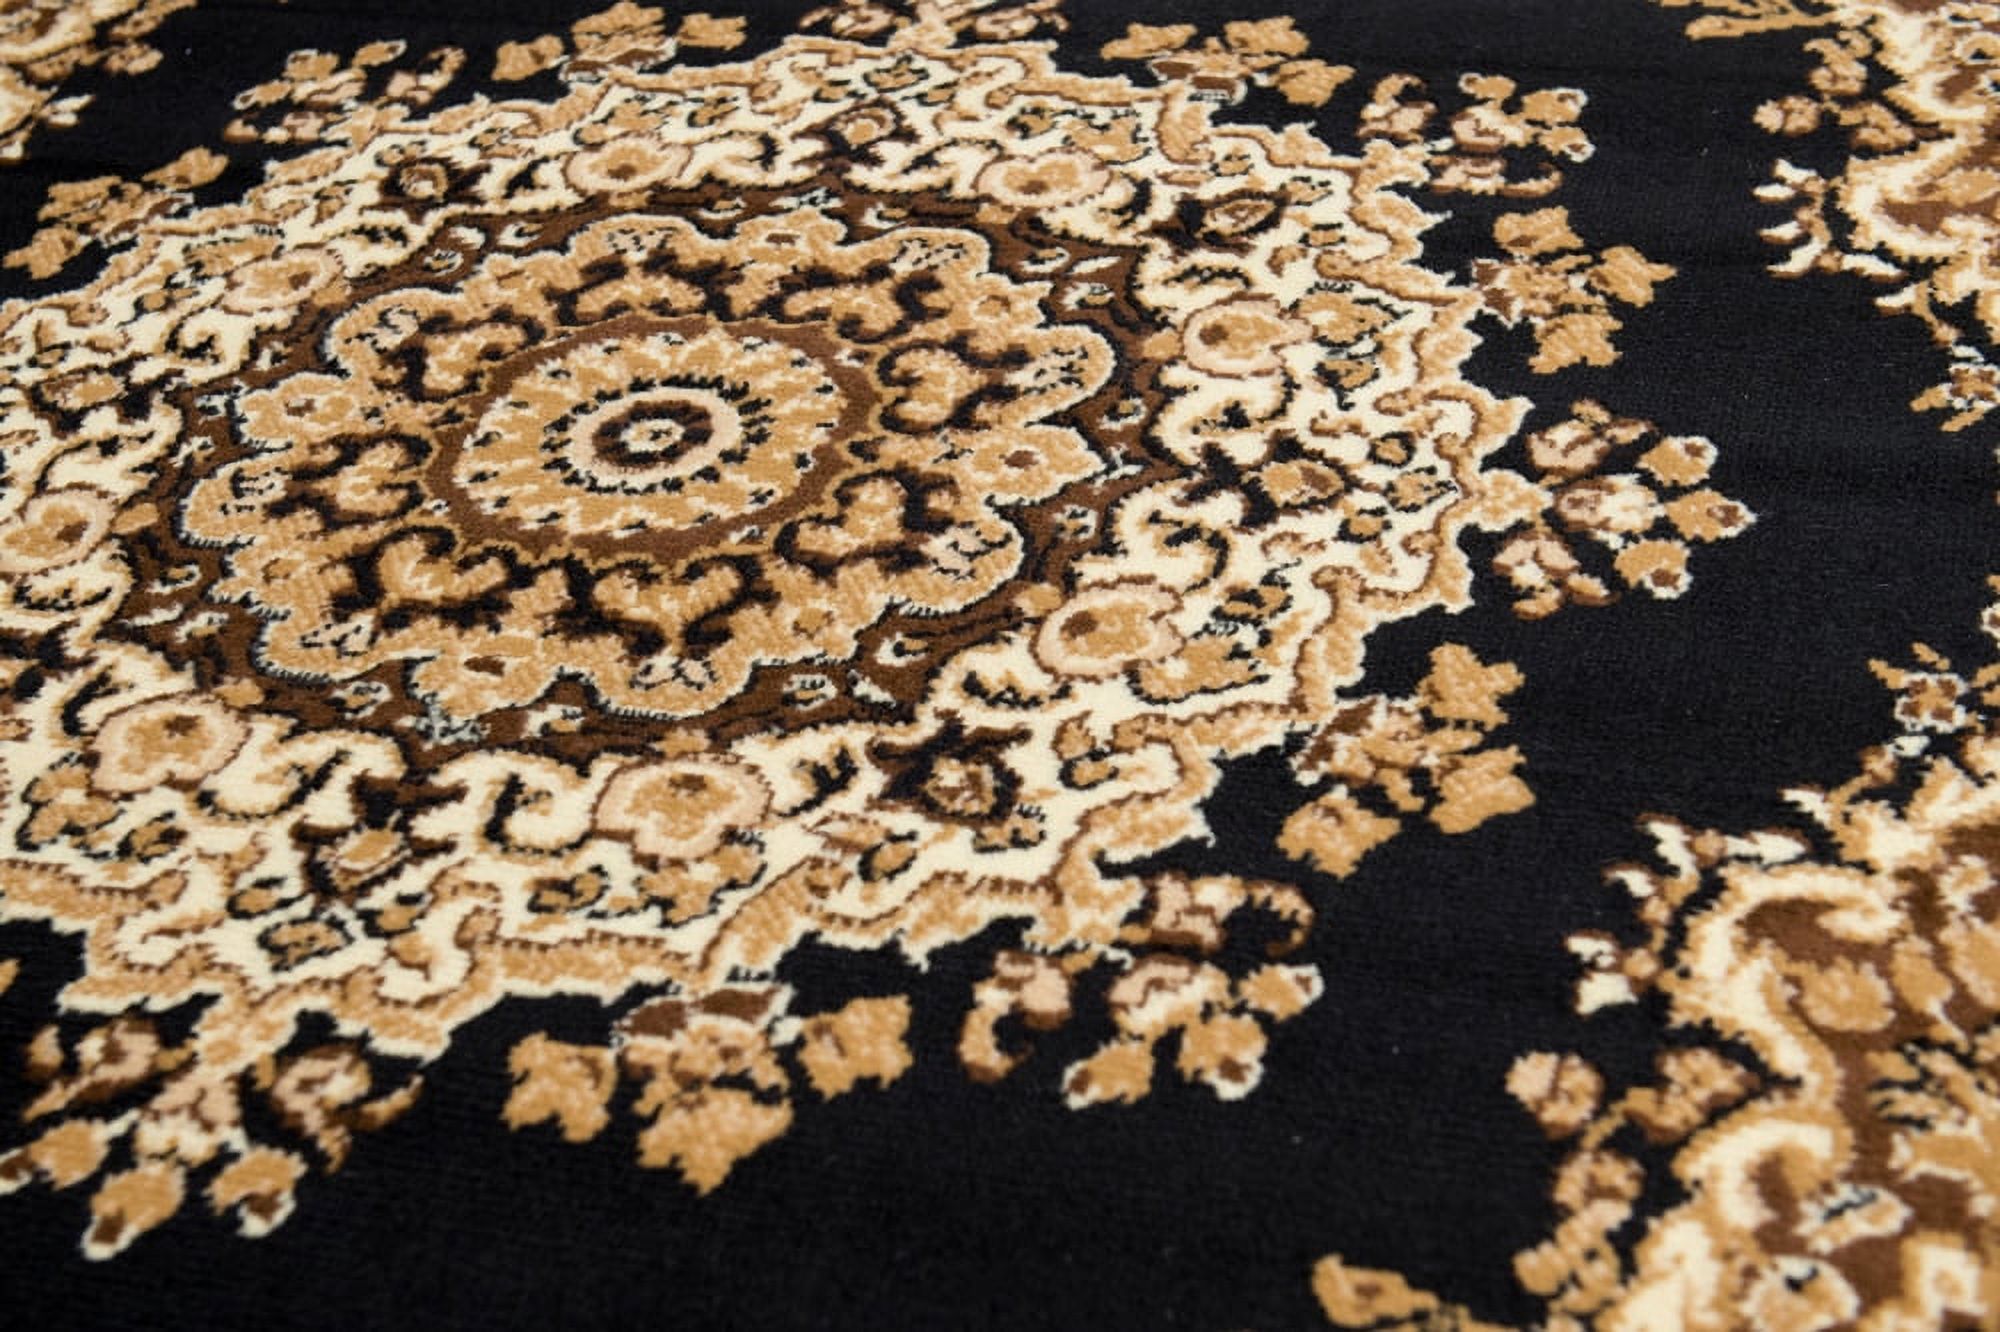 Designer Home Soft Traditional Oriental Area Rug with Center Medallion - Actual Size: 5' 3" x 7' 2" Rectangle (Black) - image 3 of 5